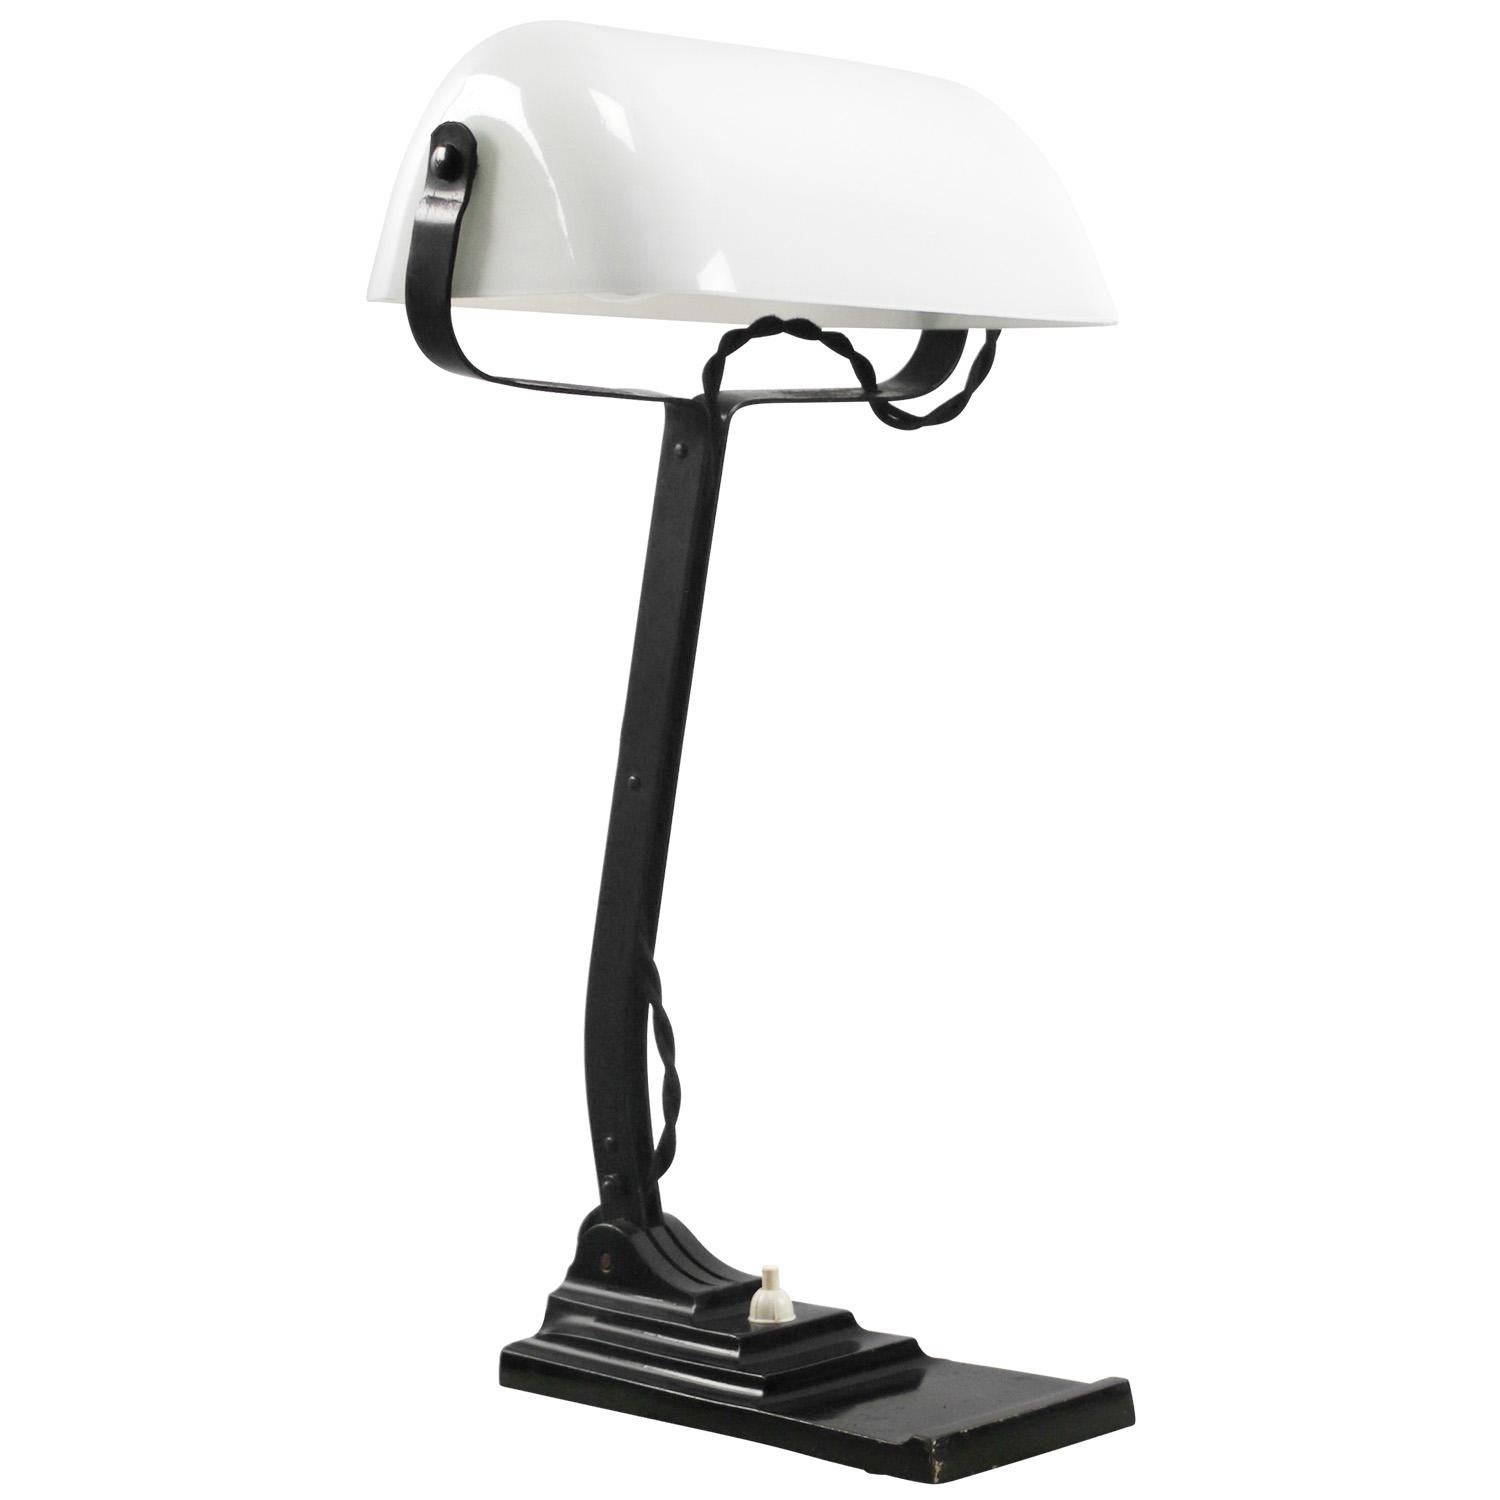 White opaline glass, cast iron desk light / banker’s lamp
2,5 meter black cotton flex, plug and switch in base

Also, available with US/UK plug

Weight: 2.40 kg / 5.3 lb

Priced per individual item. All lamps have been made suitable by international